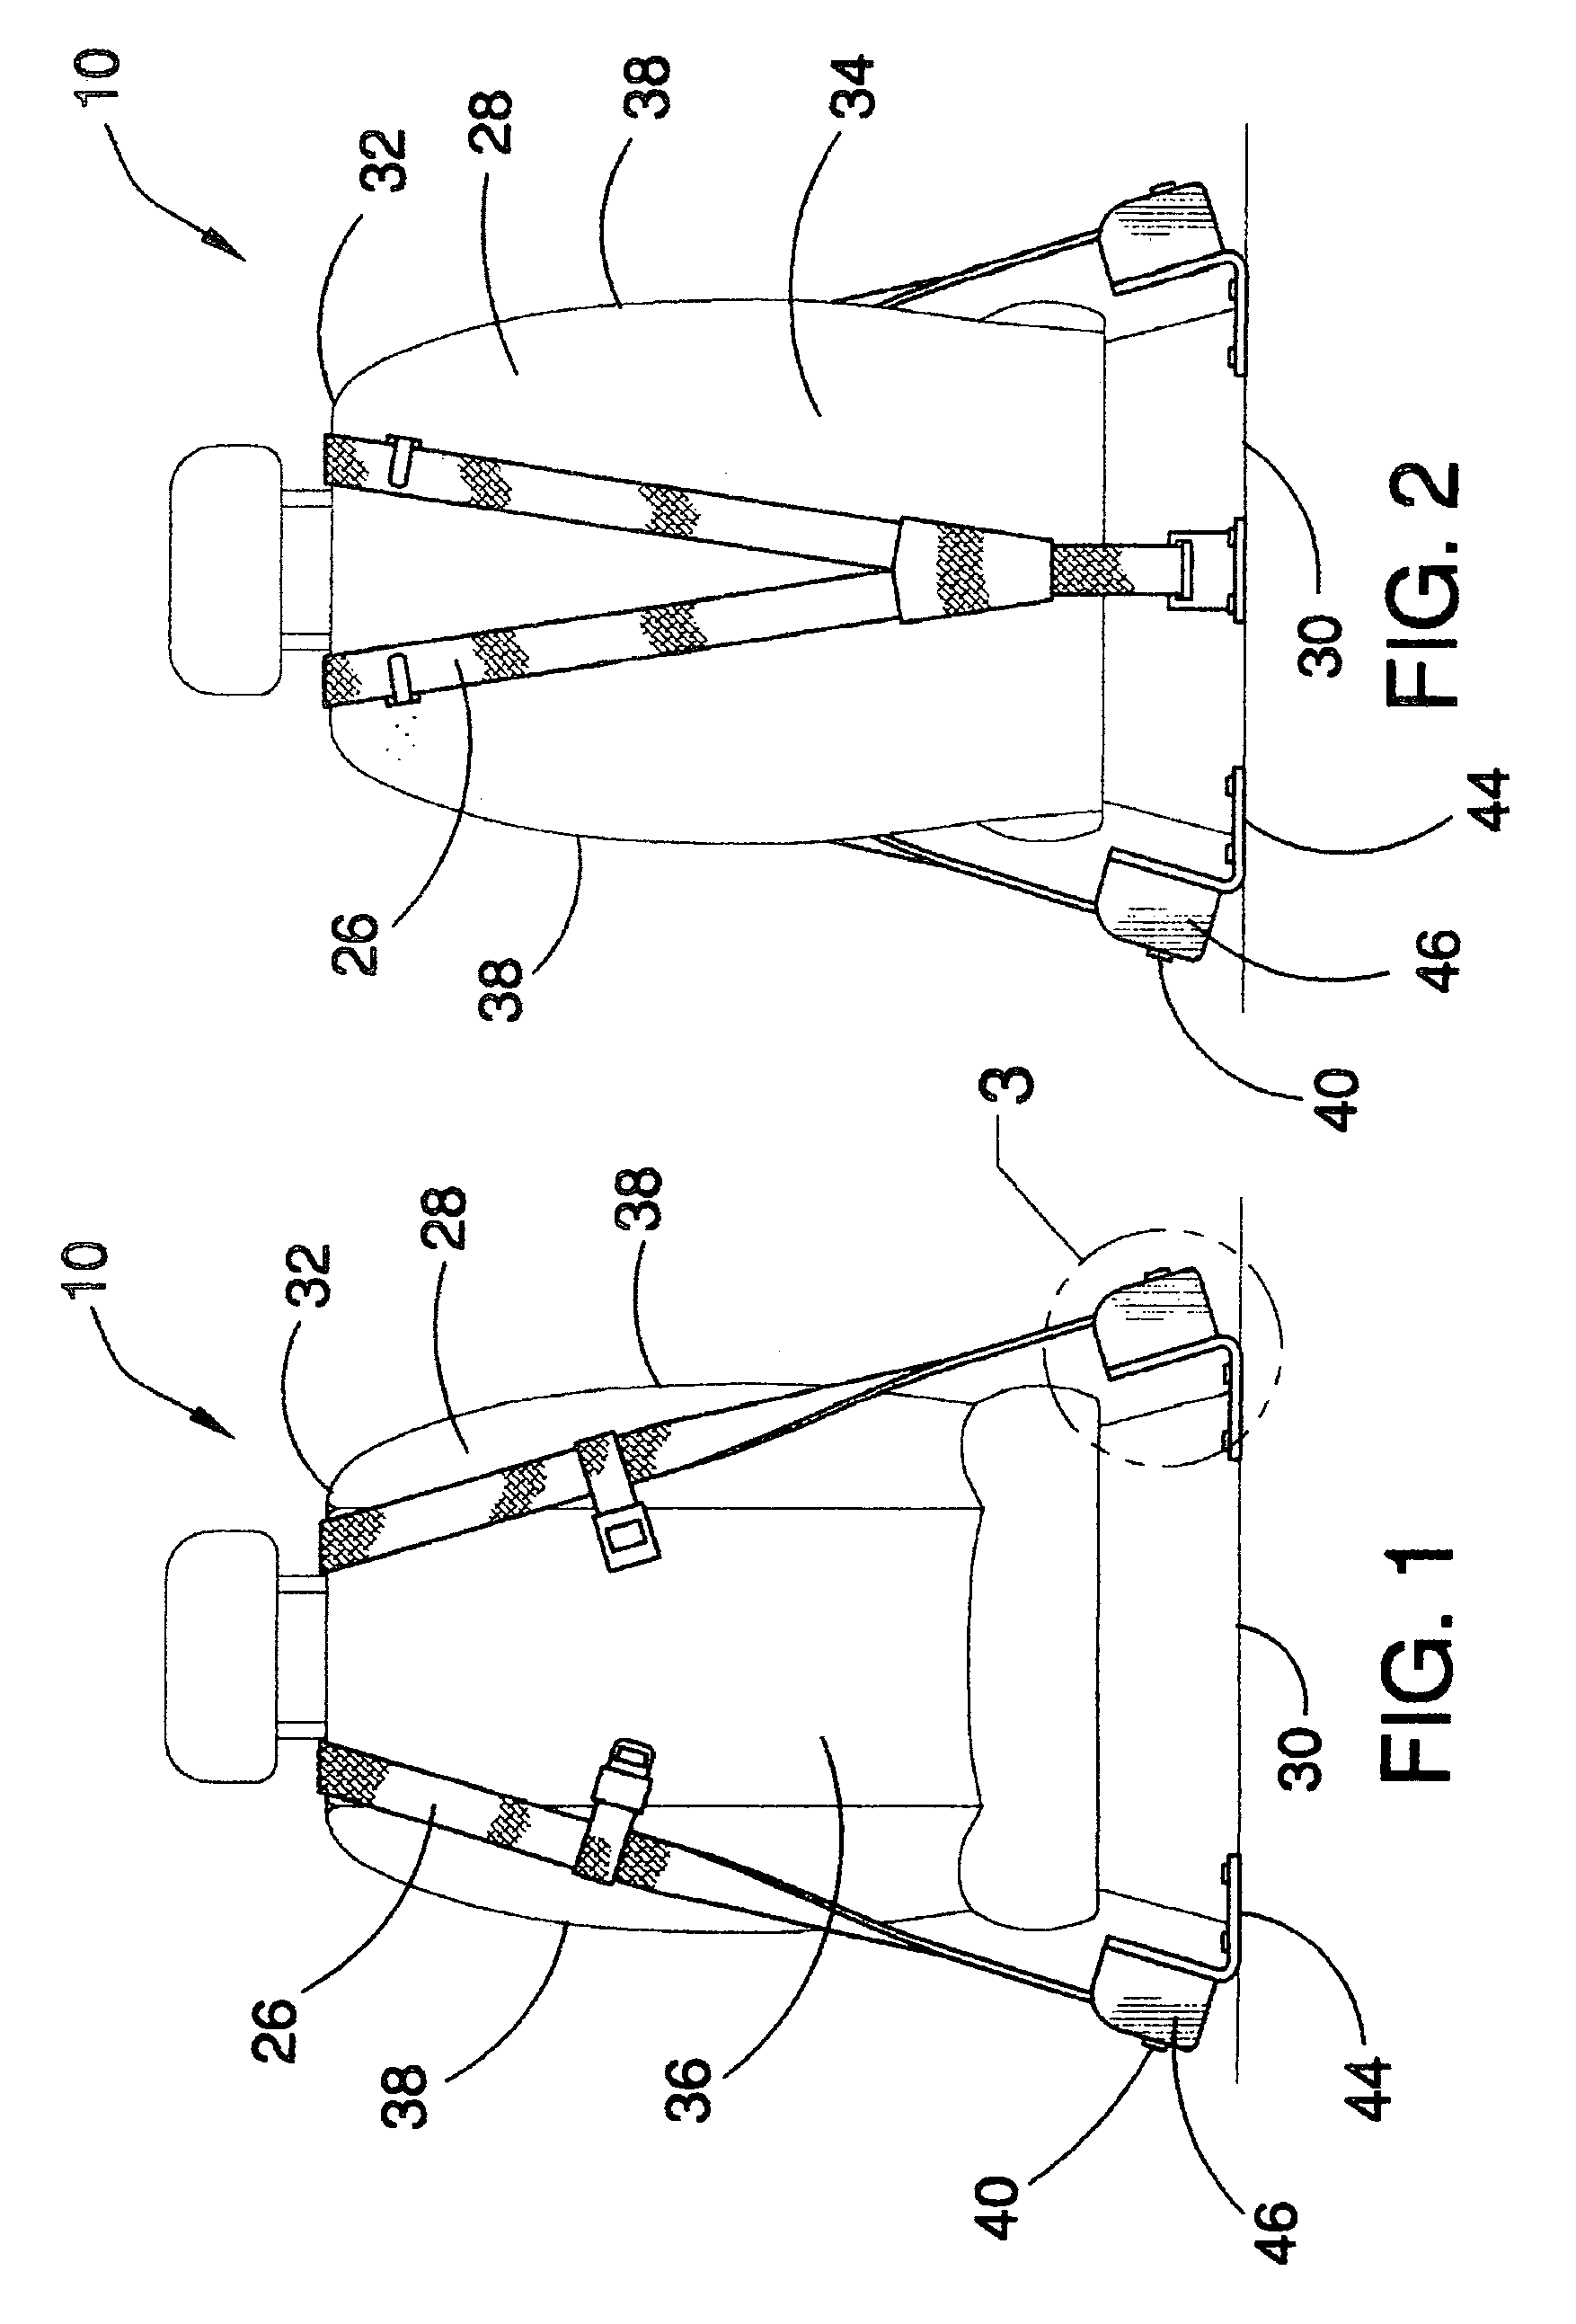 Method for producing a liquid crystal device with low zenithal anchoring energy, and resulting device